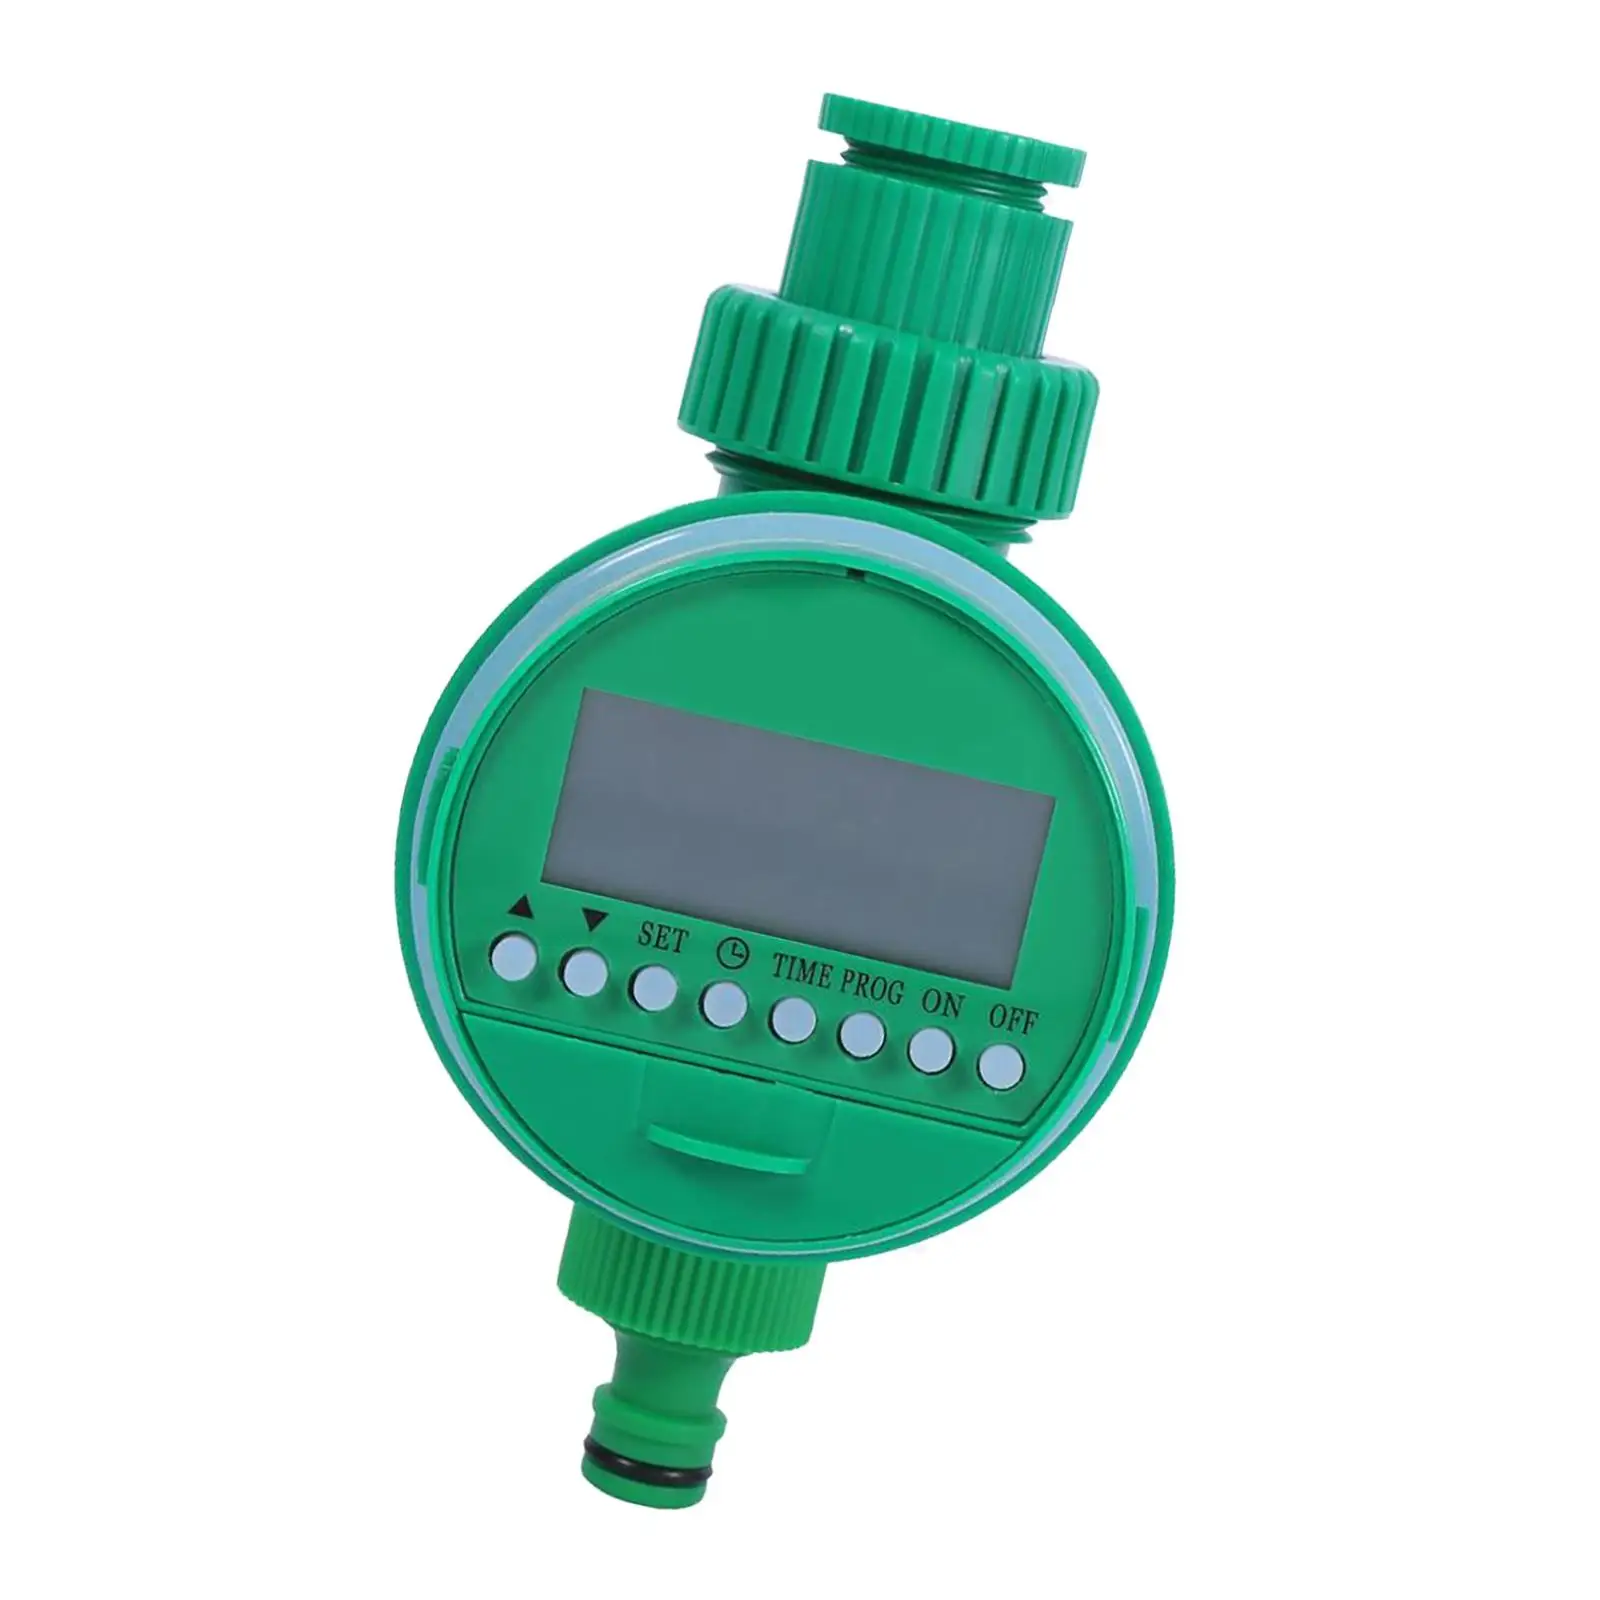 Automatic Irrigation Timer Valve Controller Connector Digital Watering Timer for Lawns